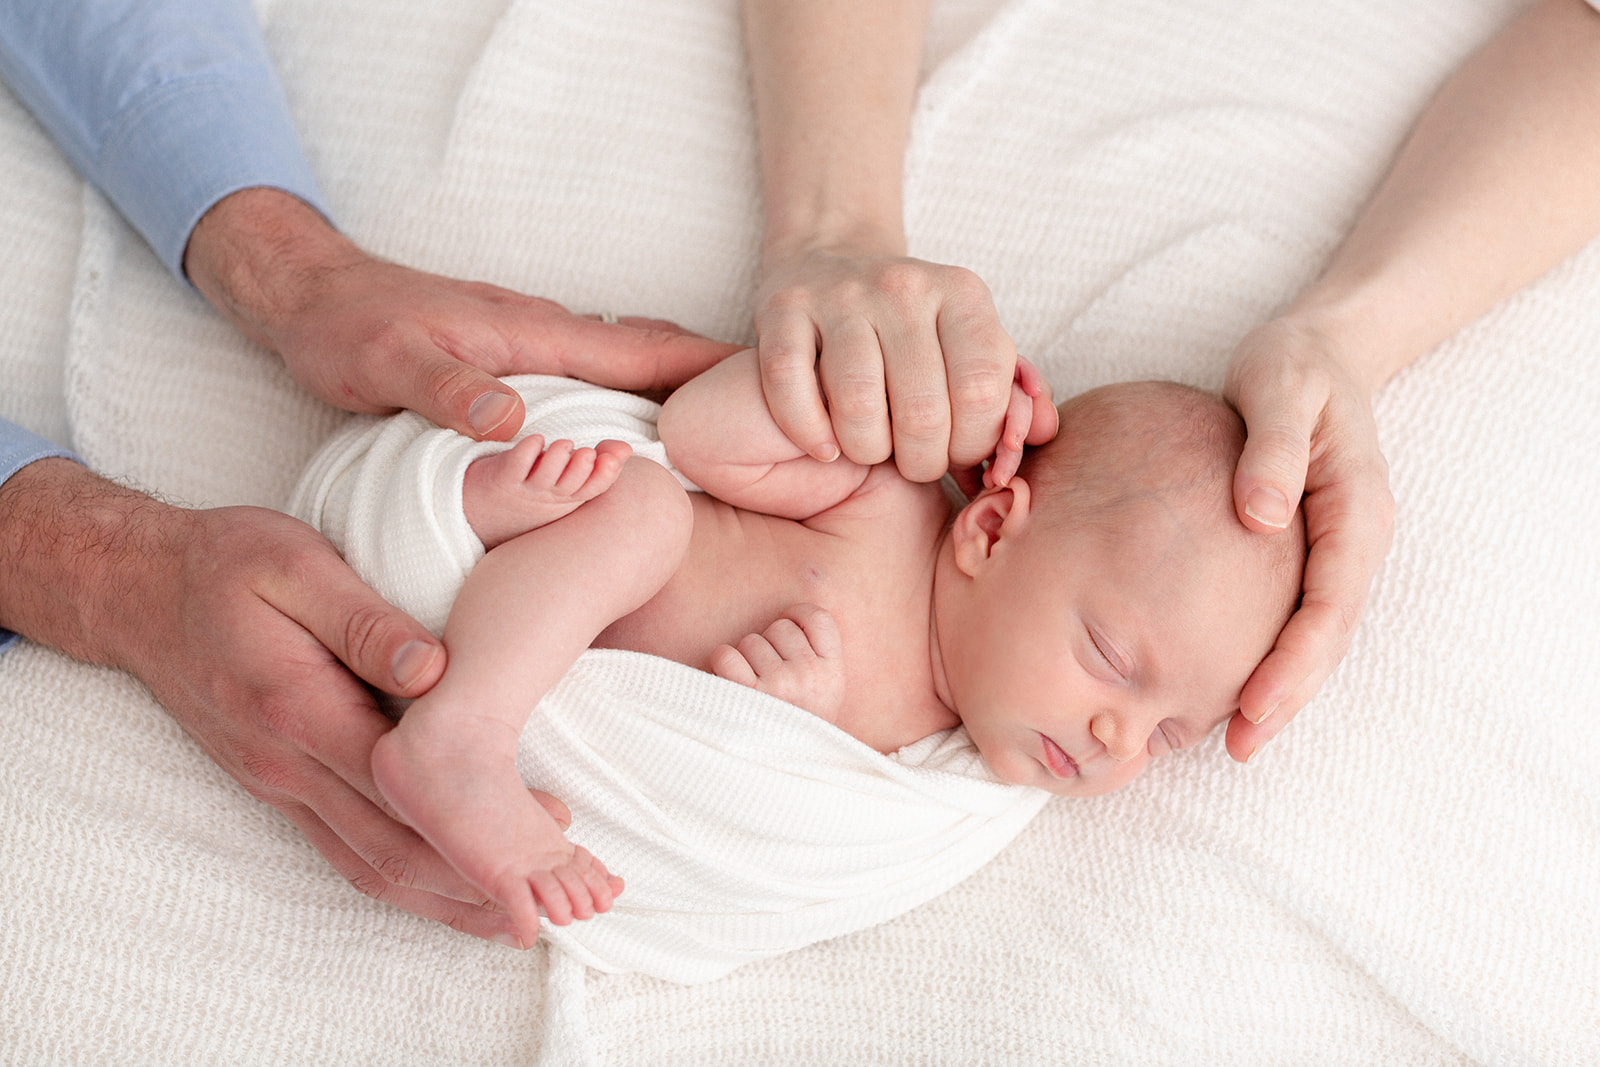 A newborn baby sleeps while being held by mom and dad's hands